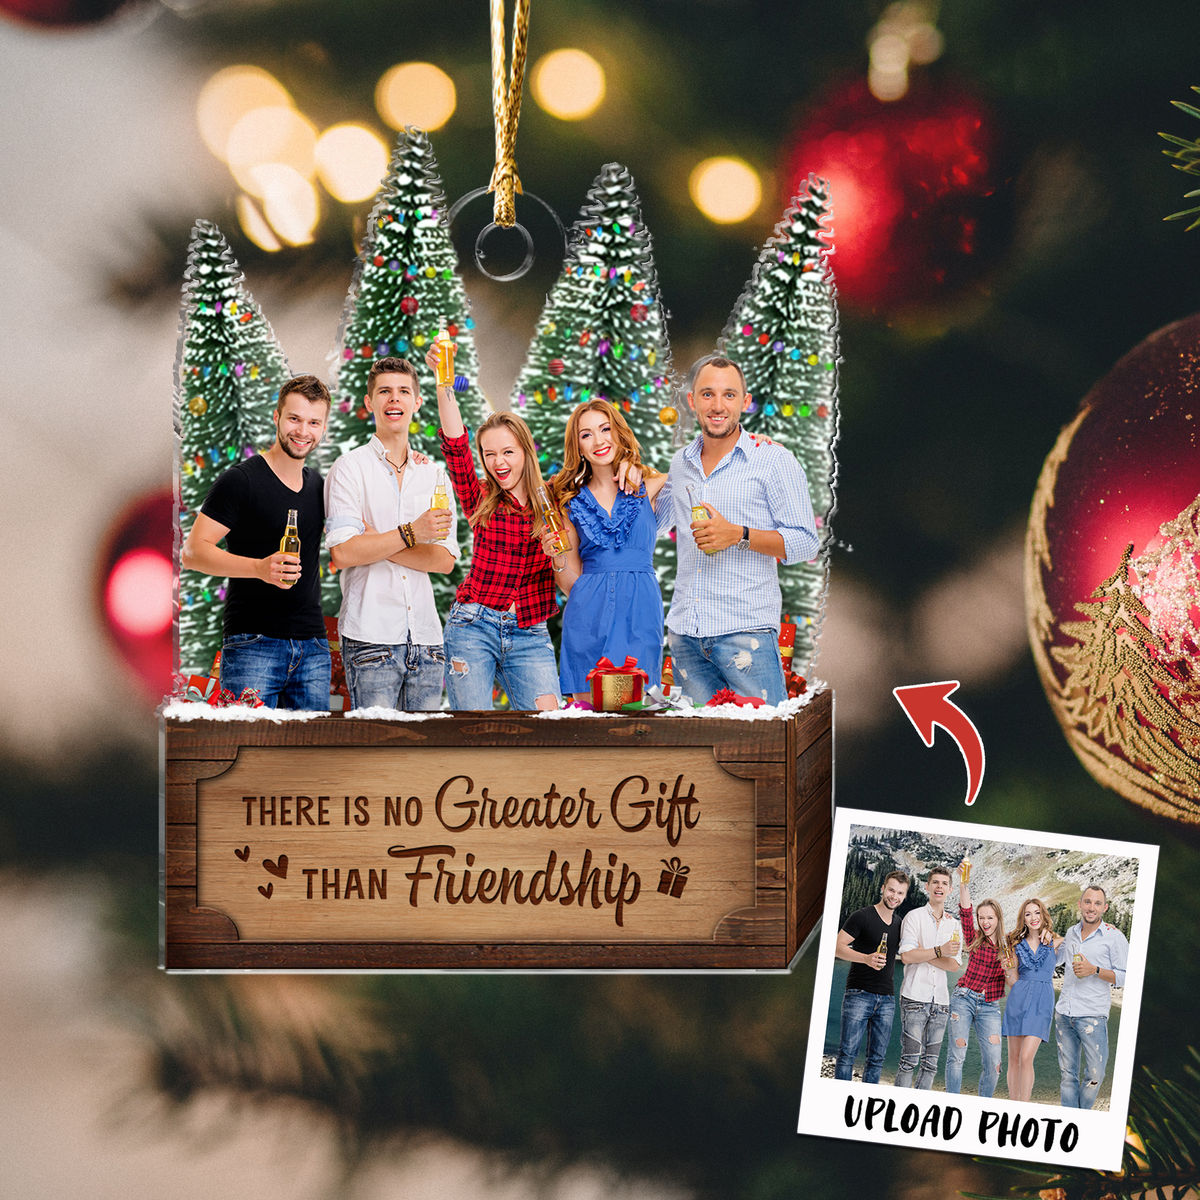 Best Friends Gifts - There is no Greater Gift than Friendship - Custom Ornament from Photo